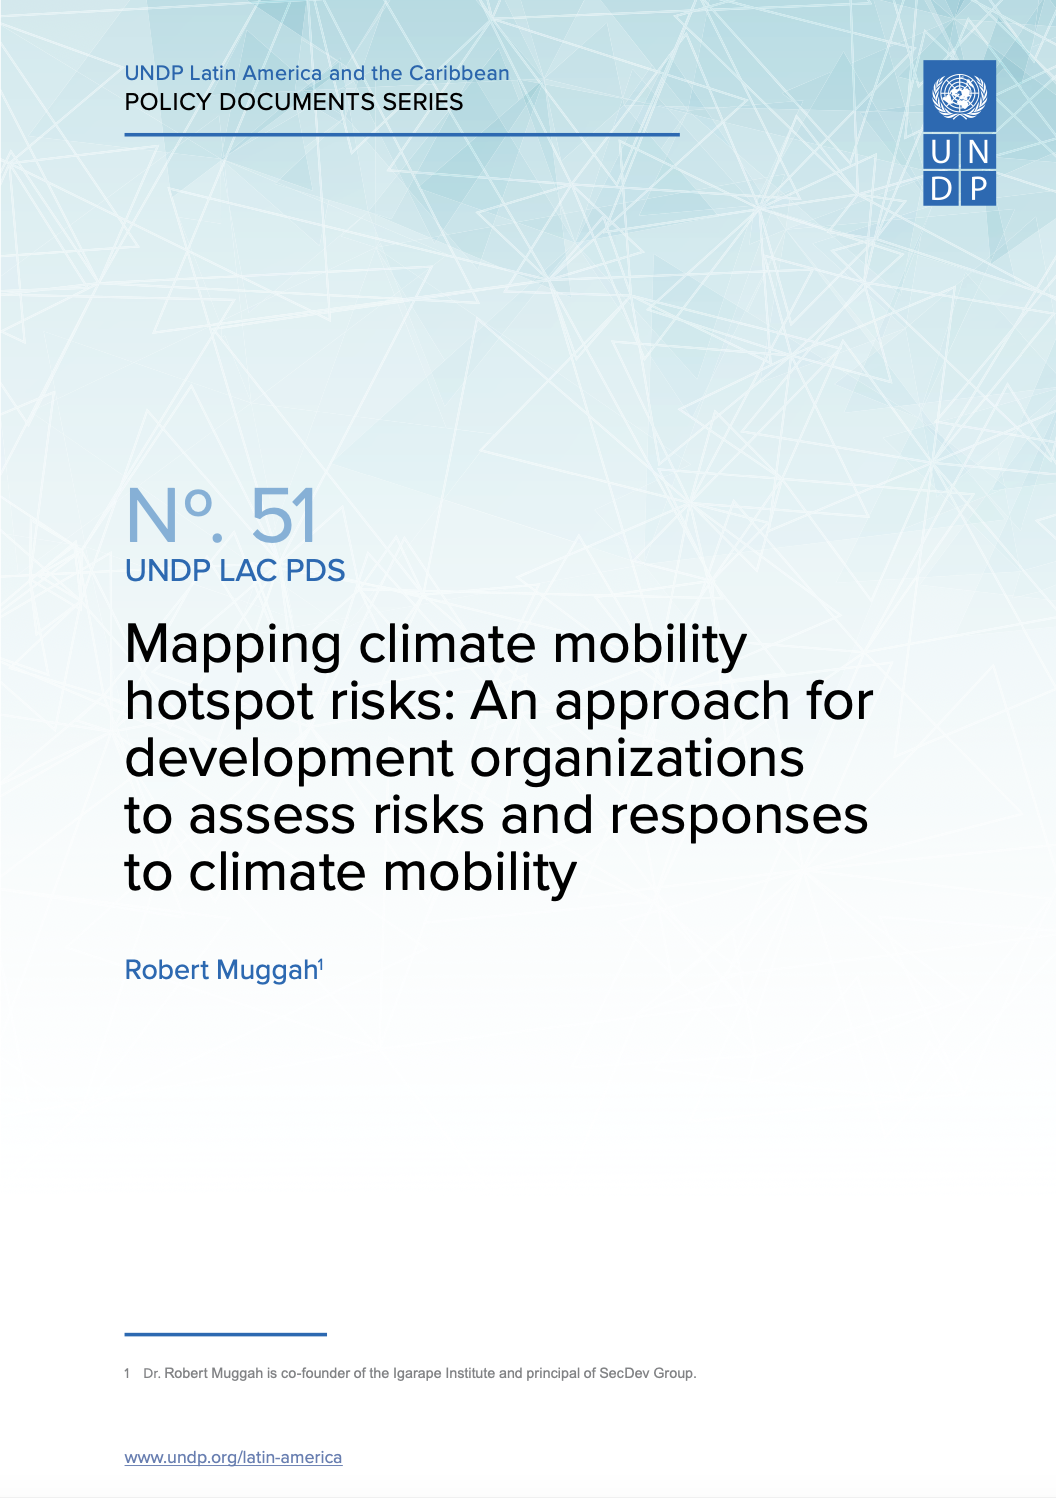 Mapping climate mobility hotspot risks: An approach for development organizations to assess risks and responses to climate mobility 